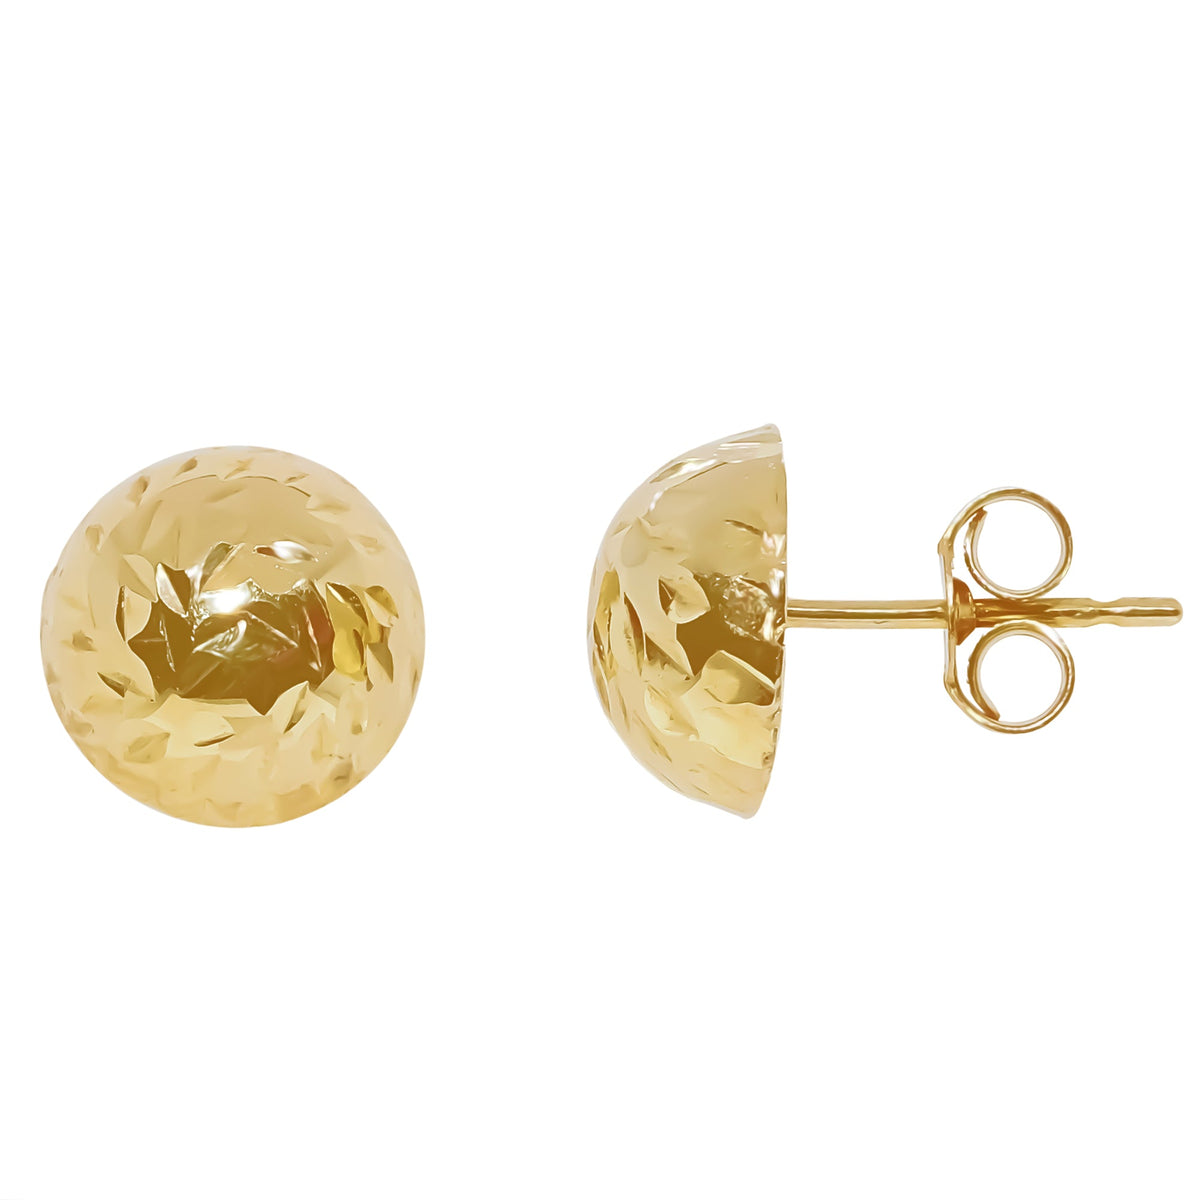 9ct gold 9mm d/c dome stud earrings